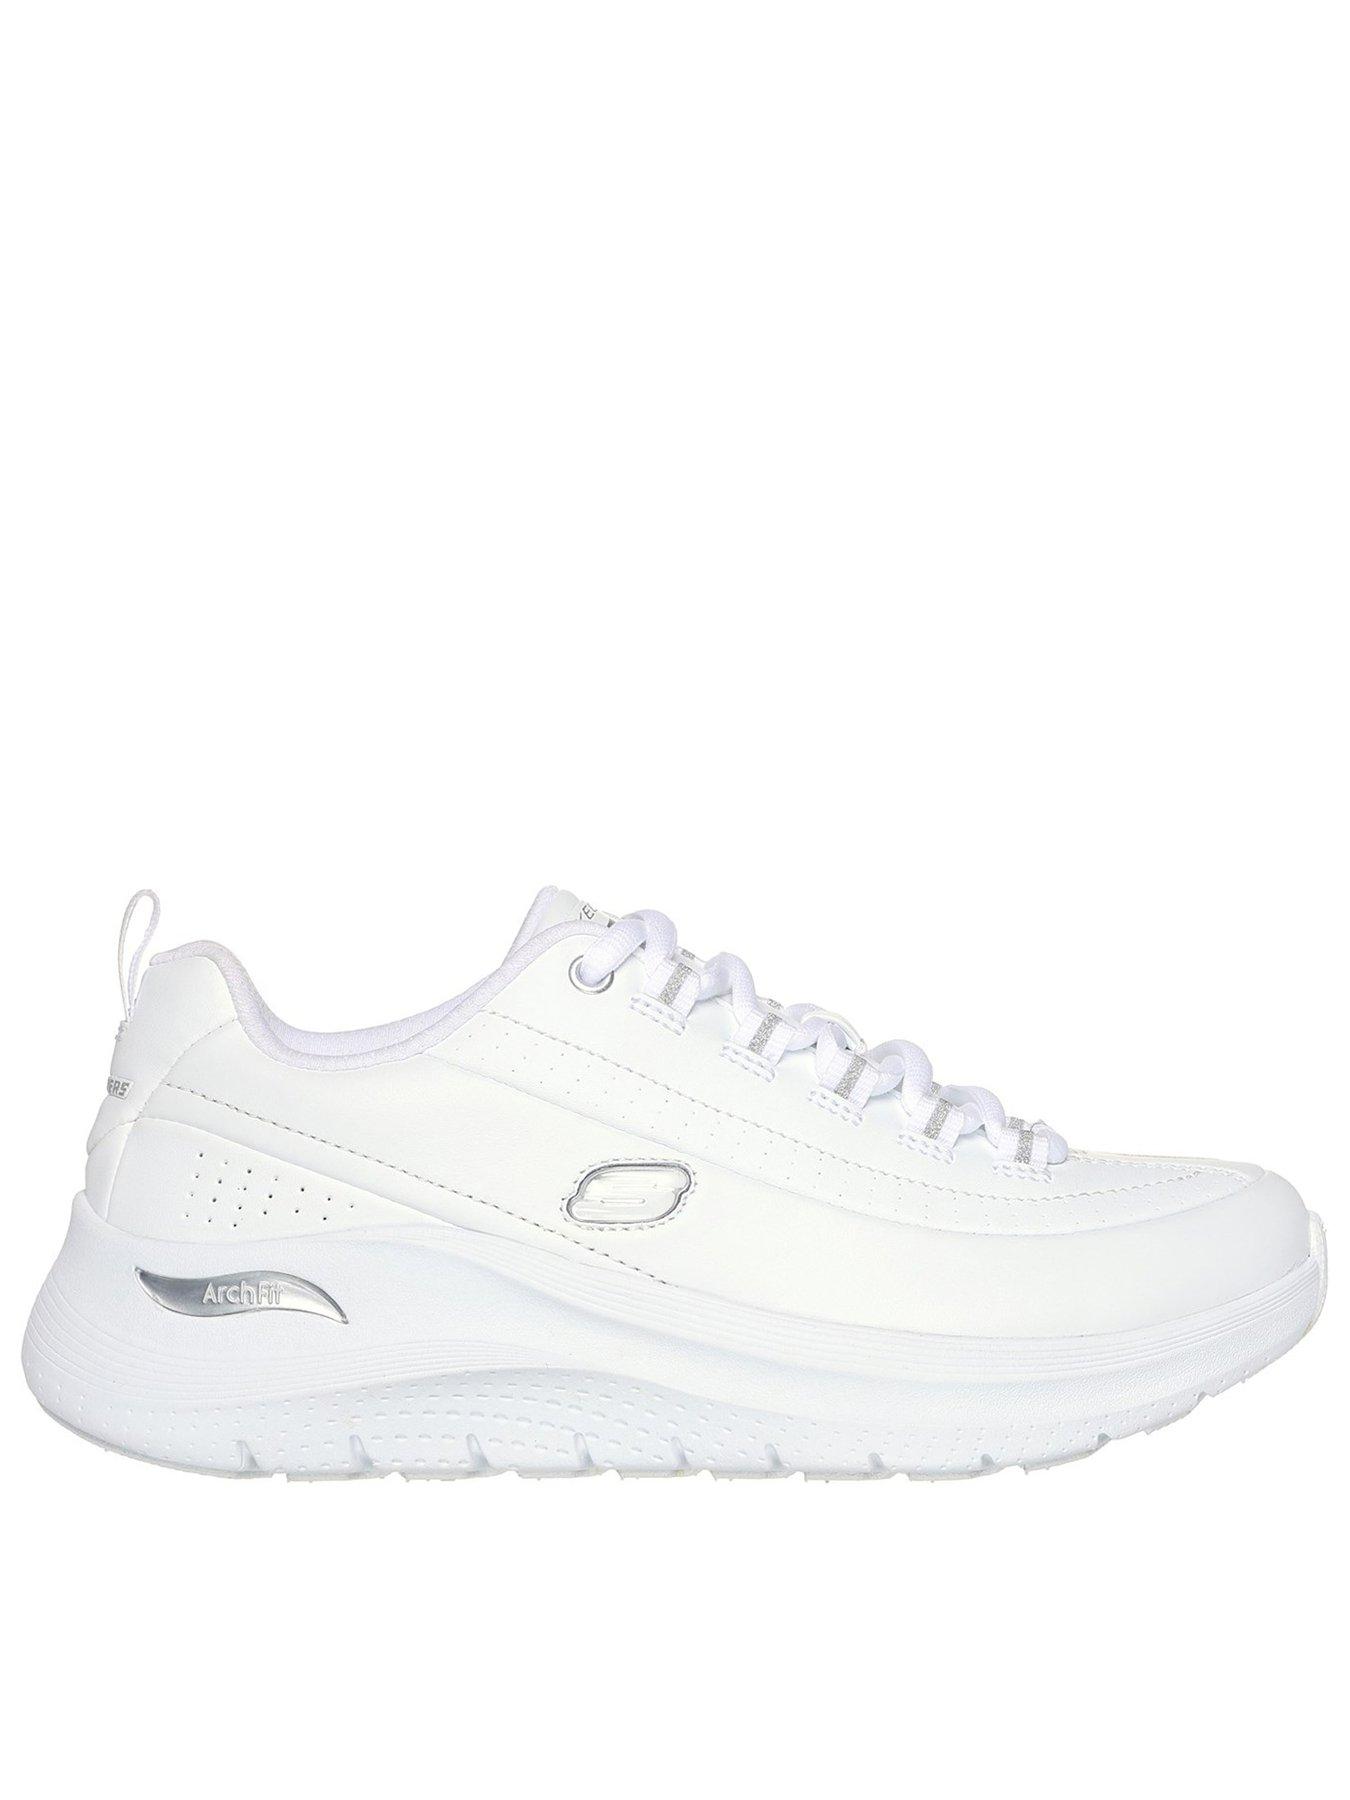 Skechers Arch Fit Classic Leather Premium Lace Up Trainers - White